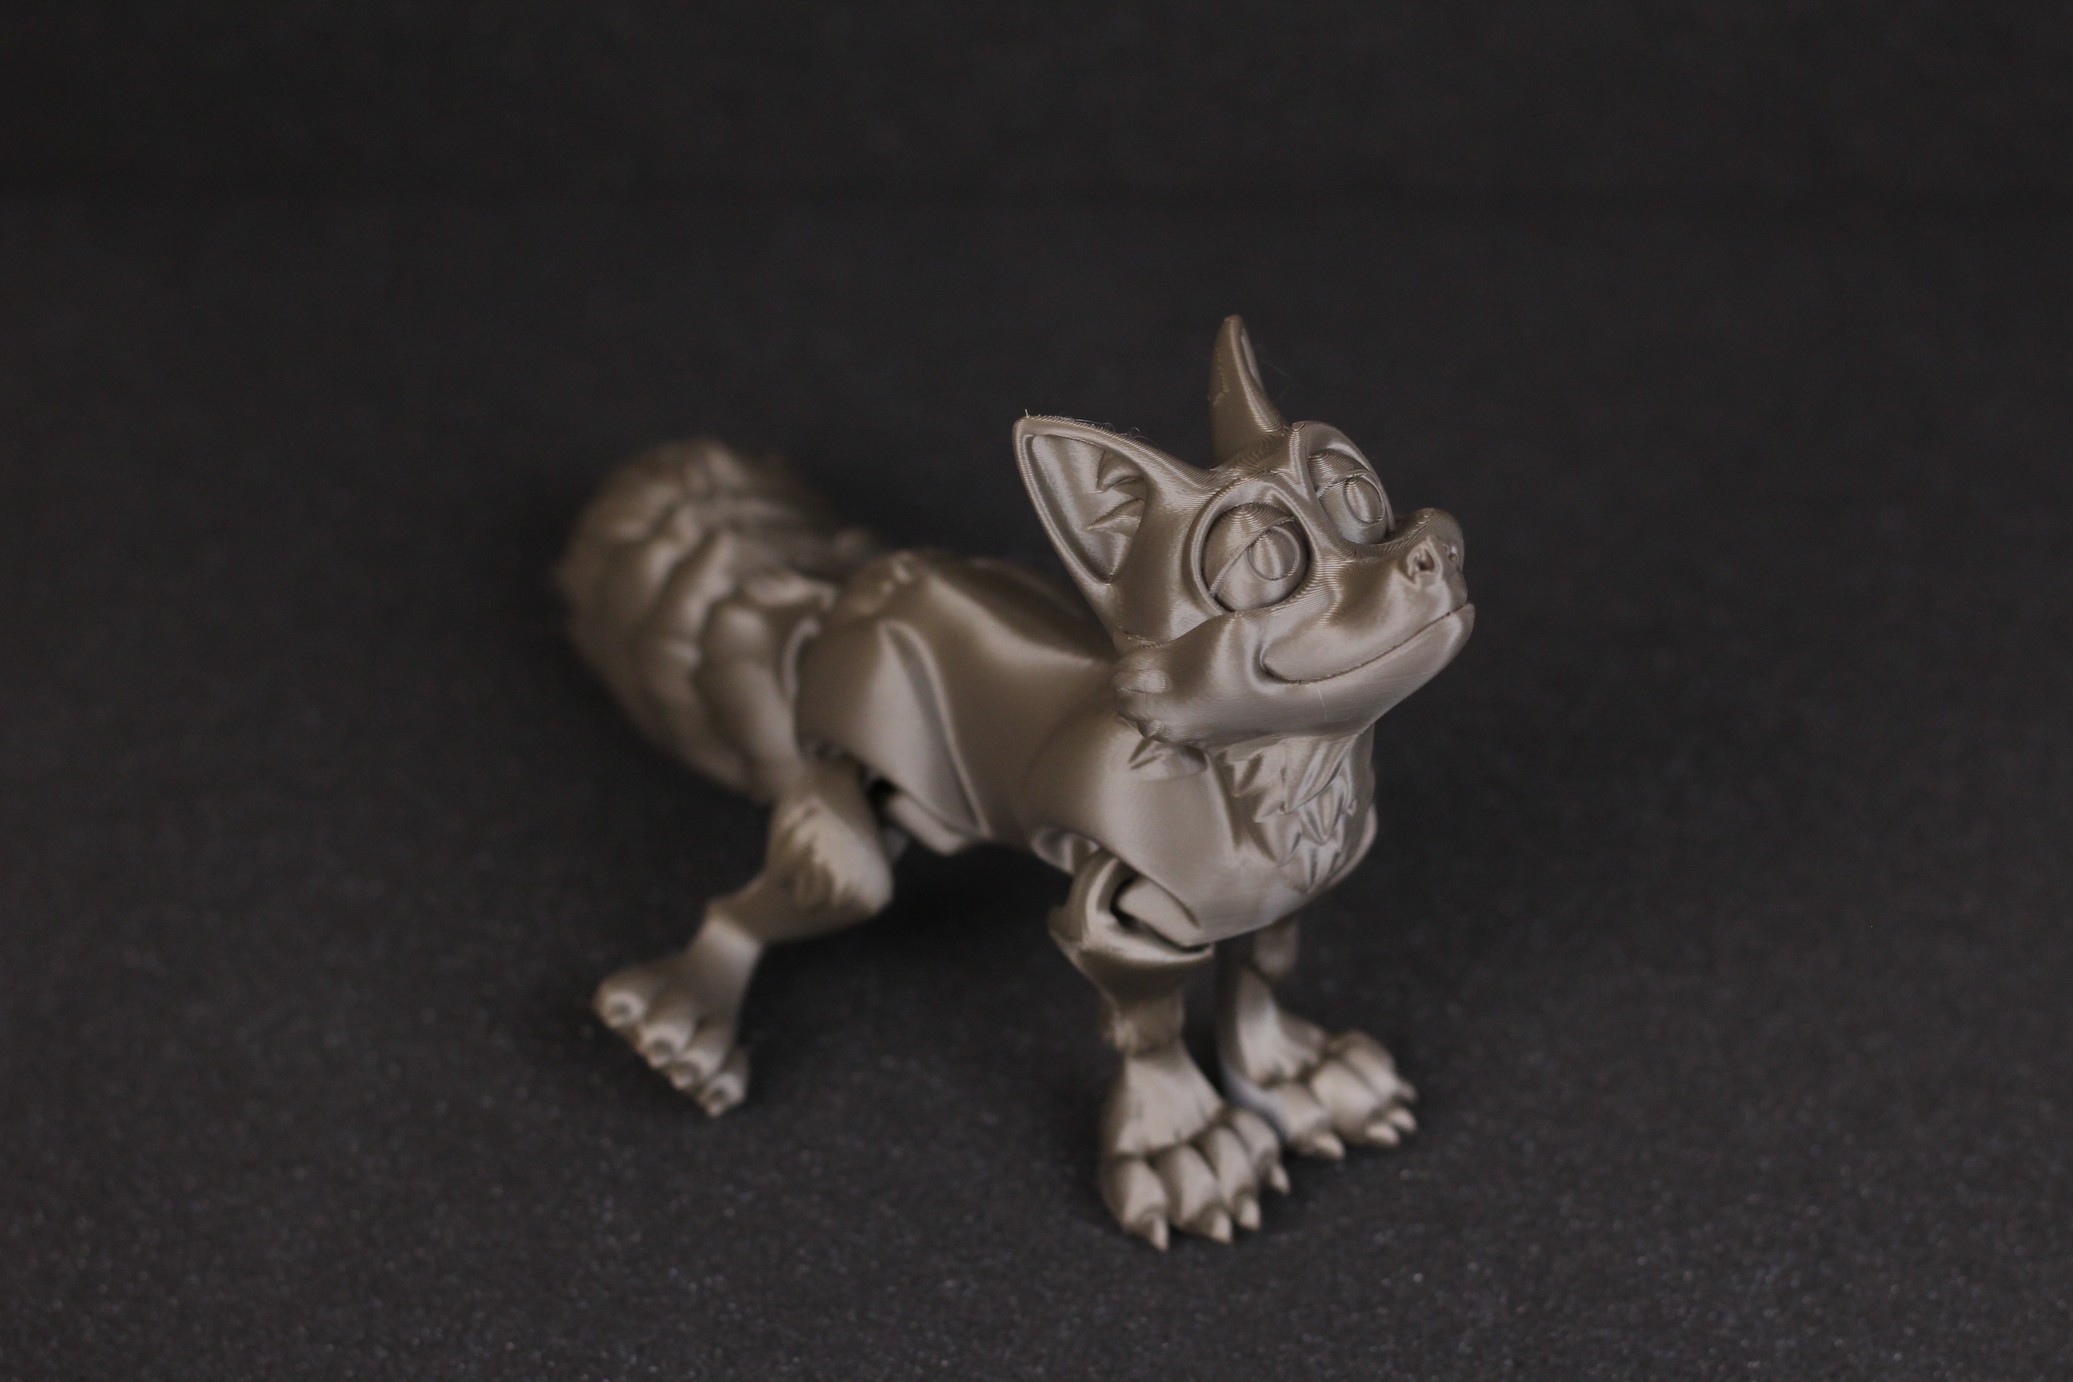 Flexi Fox printed on Ender 3 S1 5 | Creality Ender 3 S1 Review: Almost Perfect